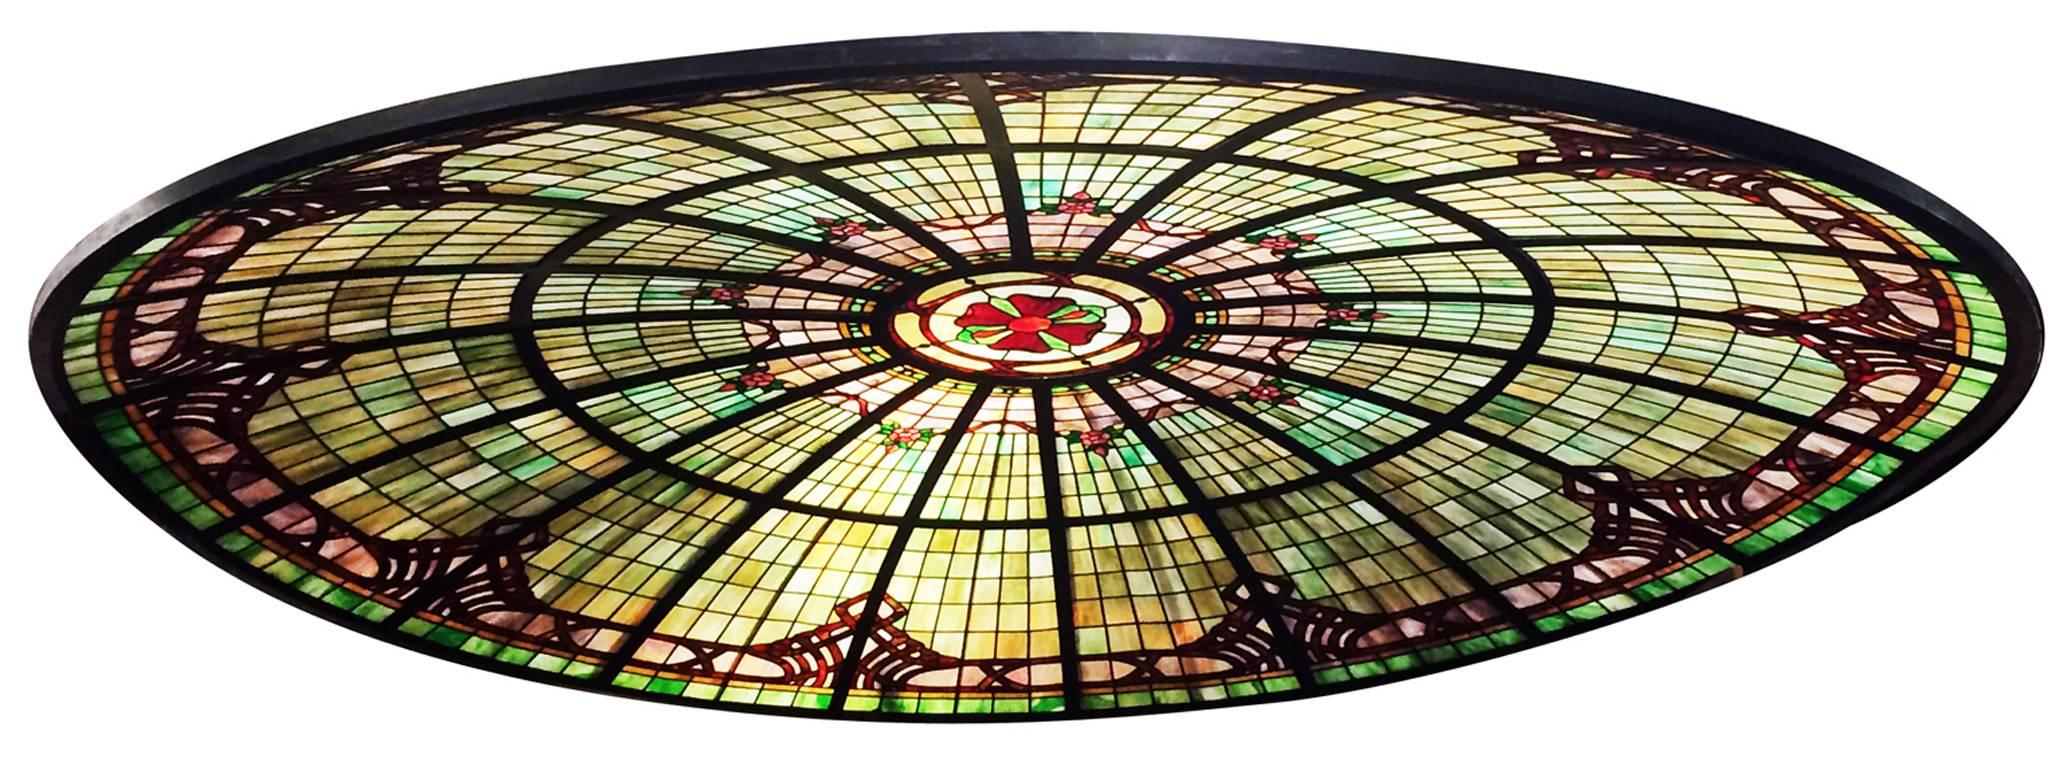 This vivid stained and jeweled glass ceiling dome depicts a wild rose theme from the center outward. Solid steel frame holds the sections of glass panel and comes apart easily for shipping and installation. Not suitable for outdoor application, but